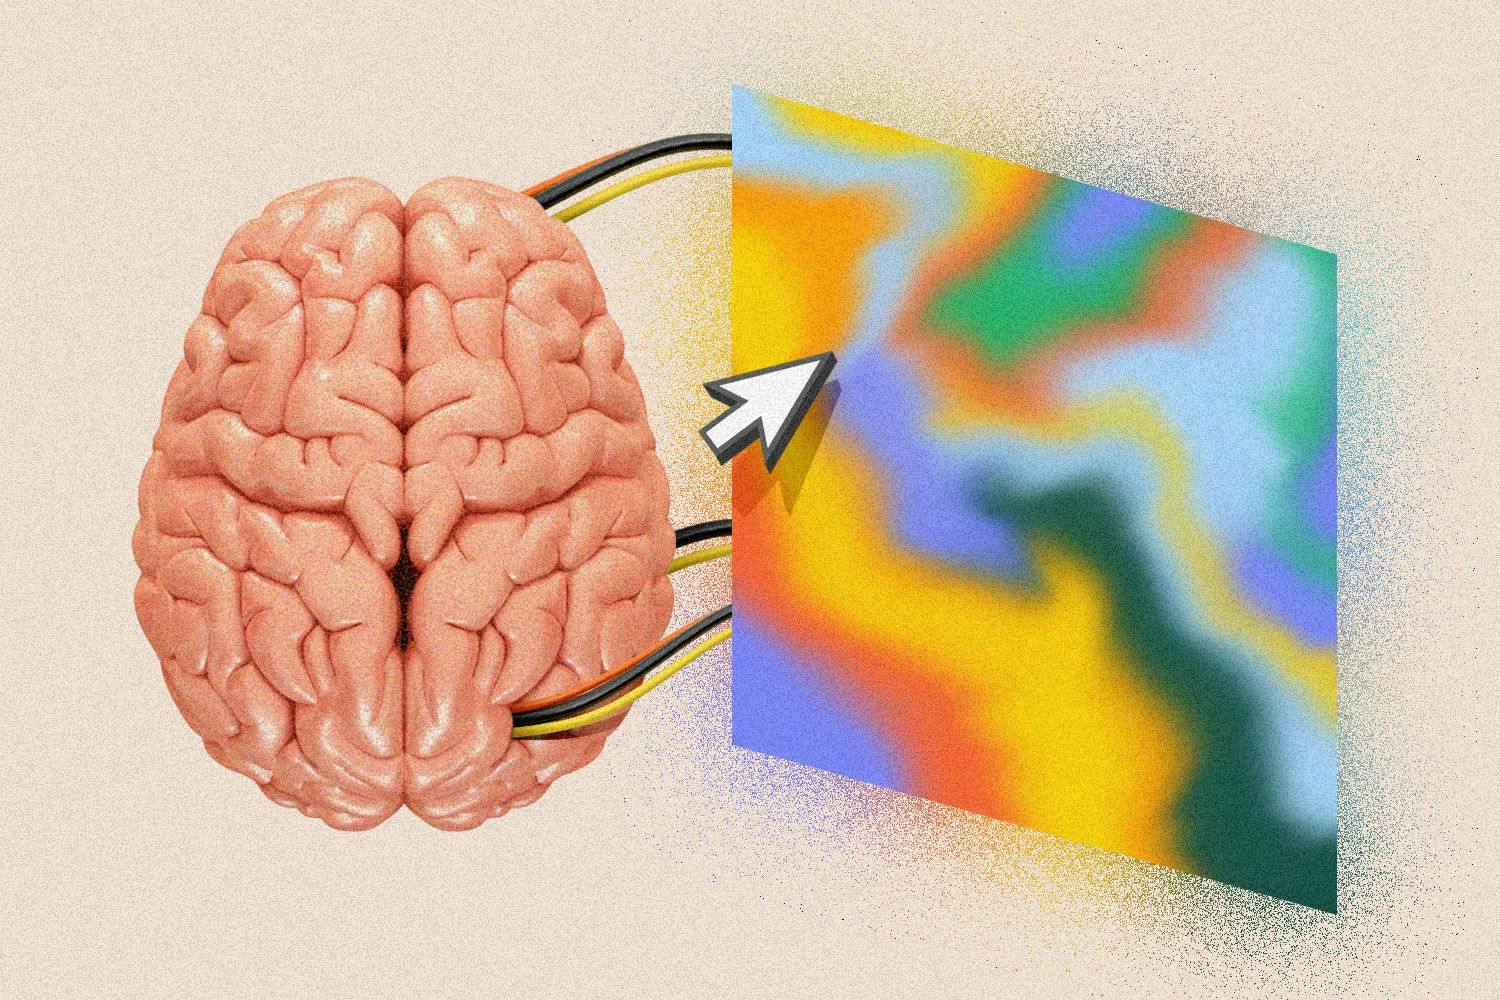 Brain connected to a monitor displaying a psychedelic pattern